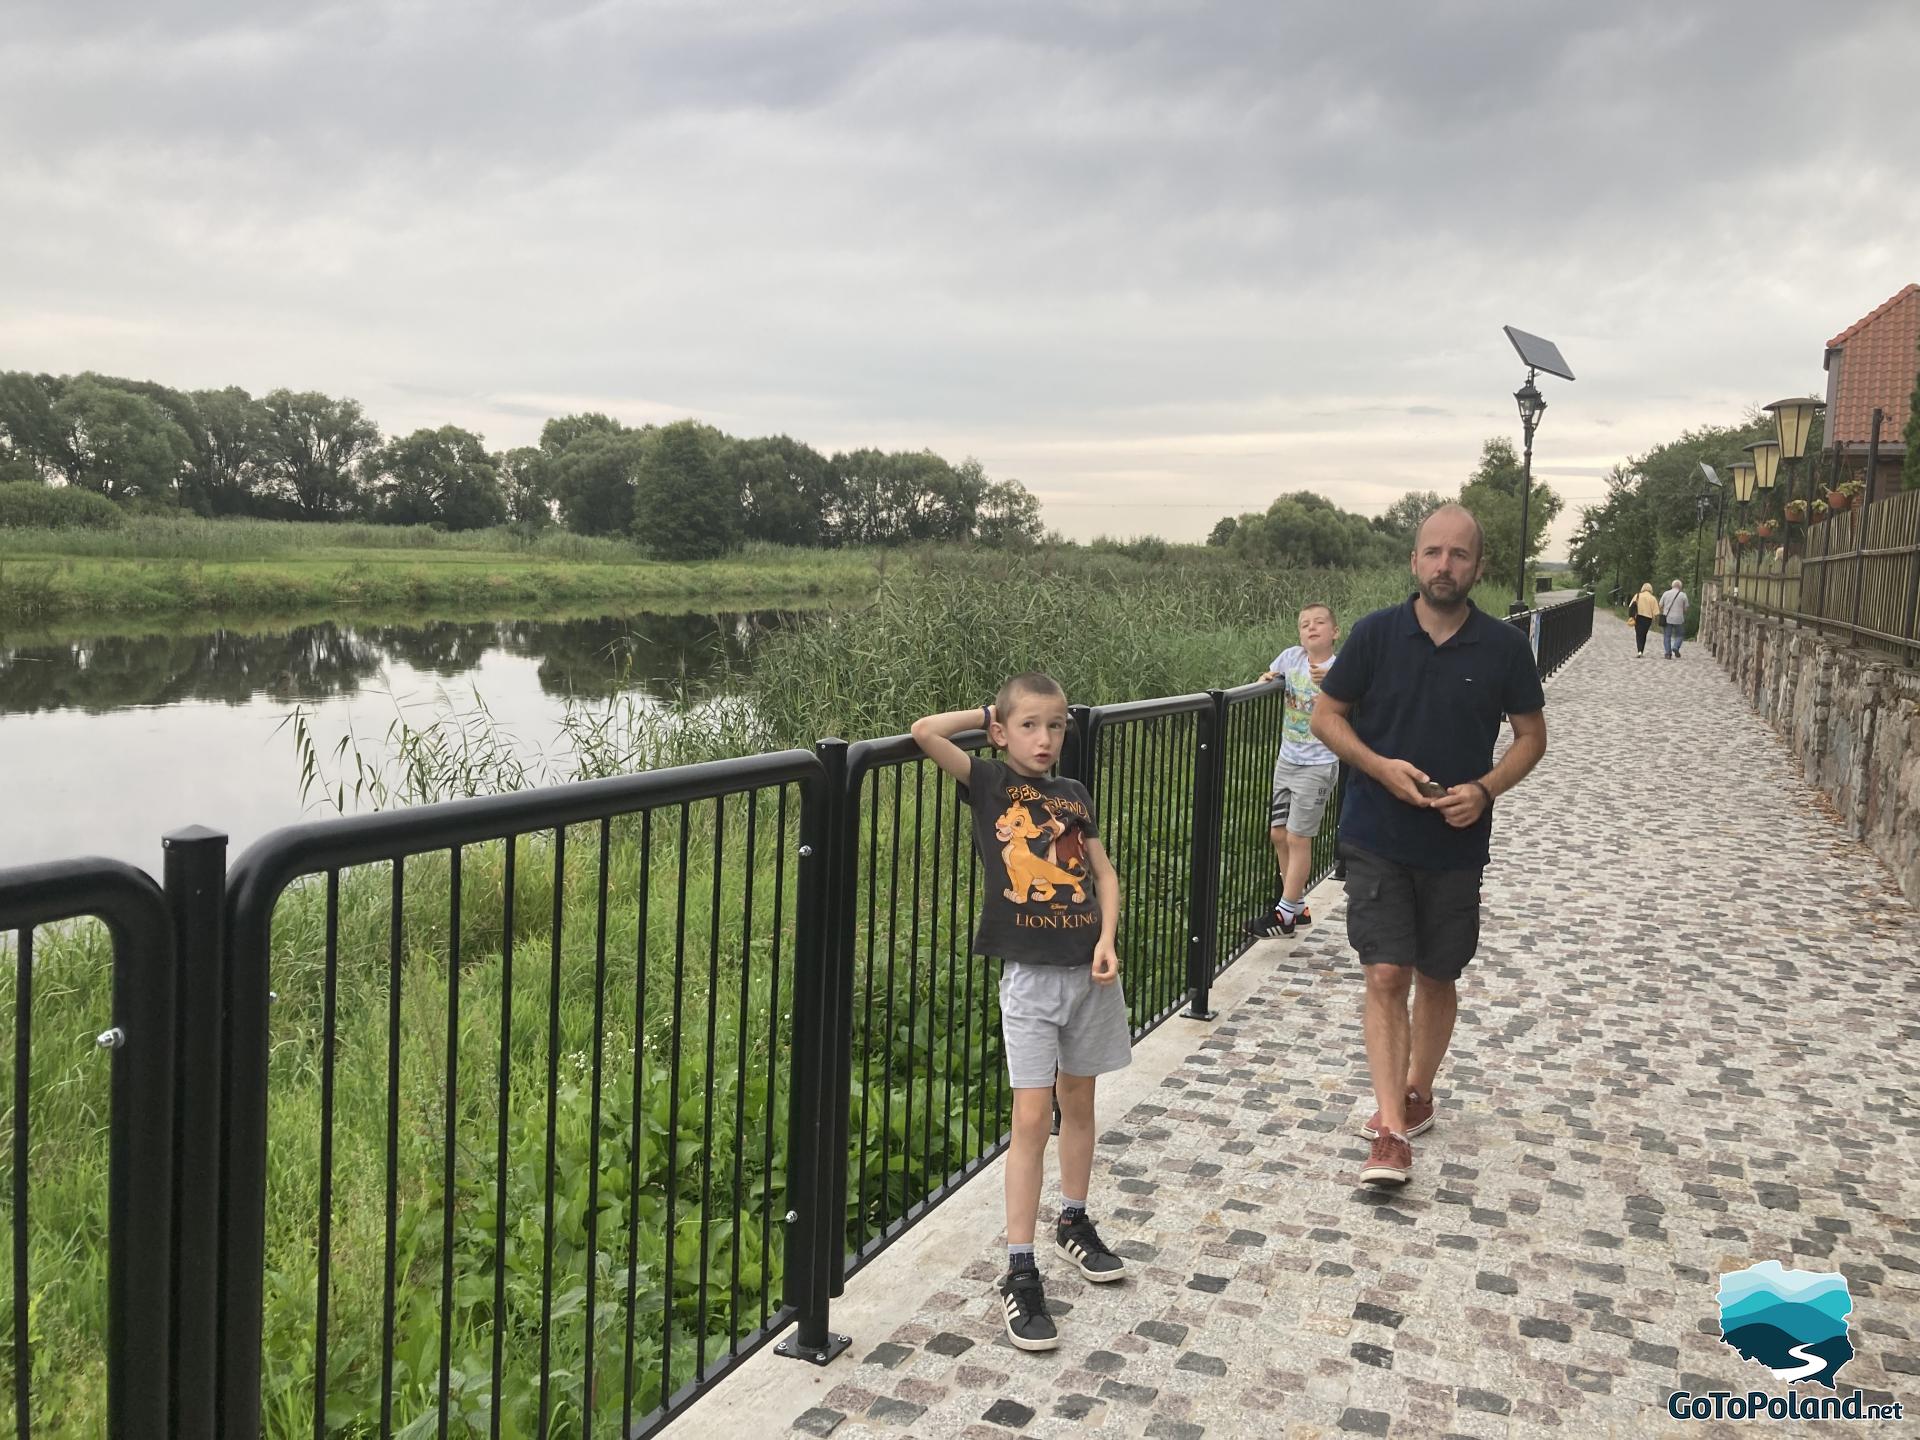 a man and two children on the pavement, a fence separates the pavement from the river, grass and reeds grow around the river